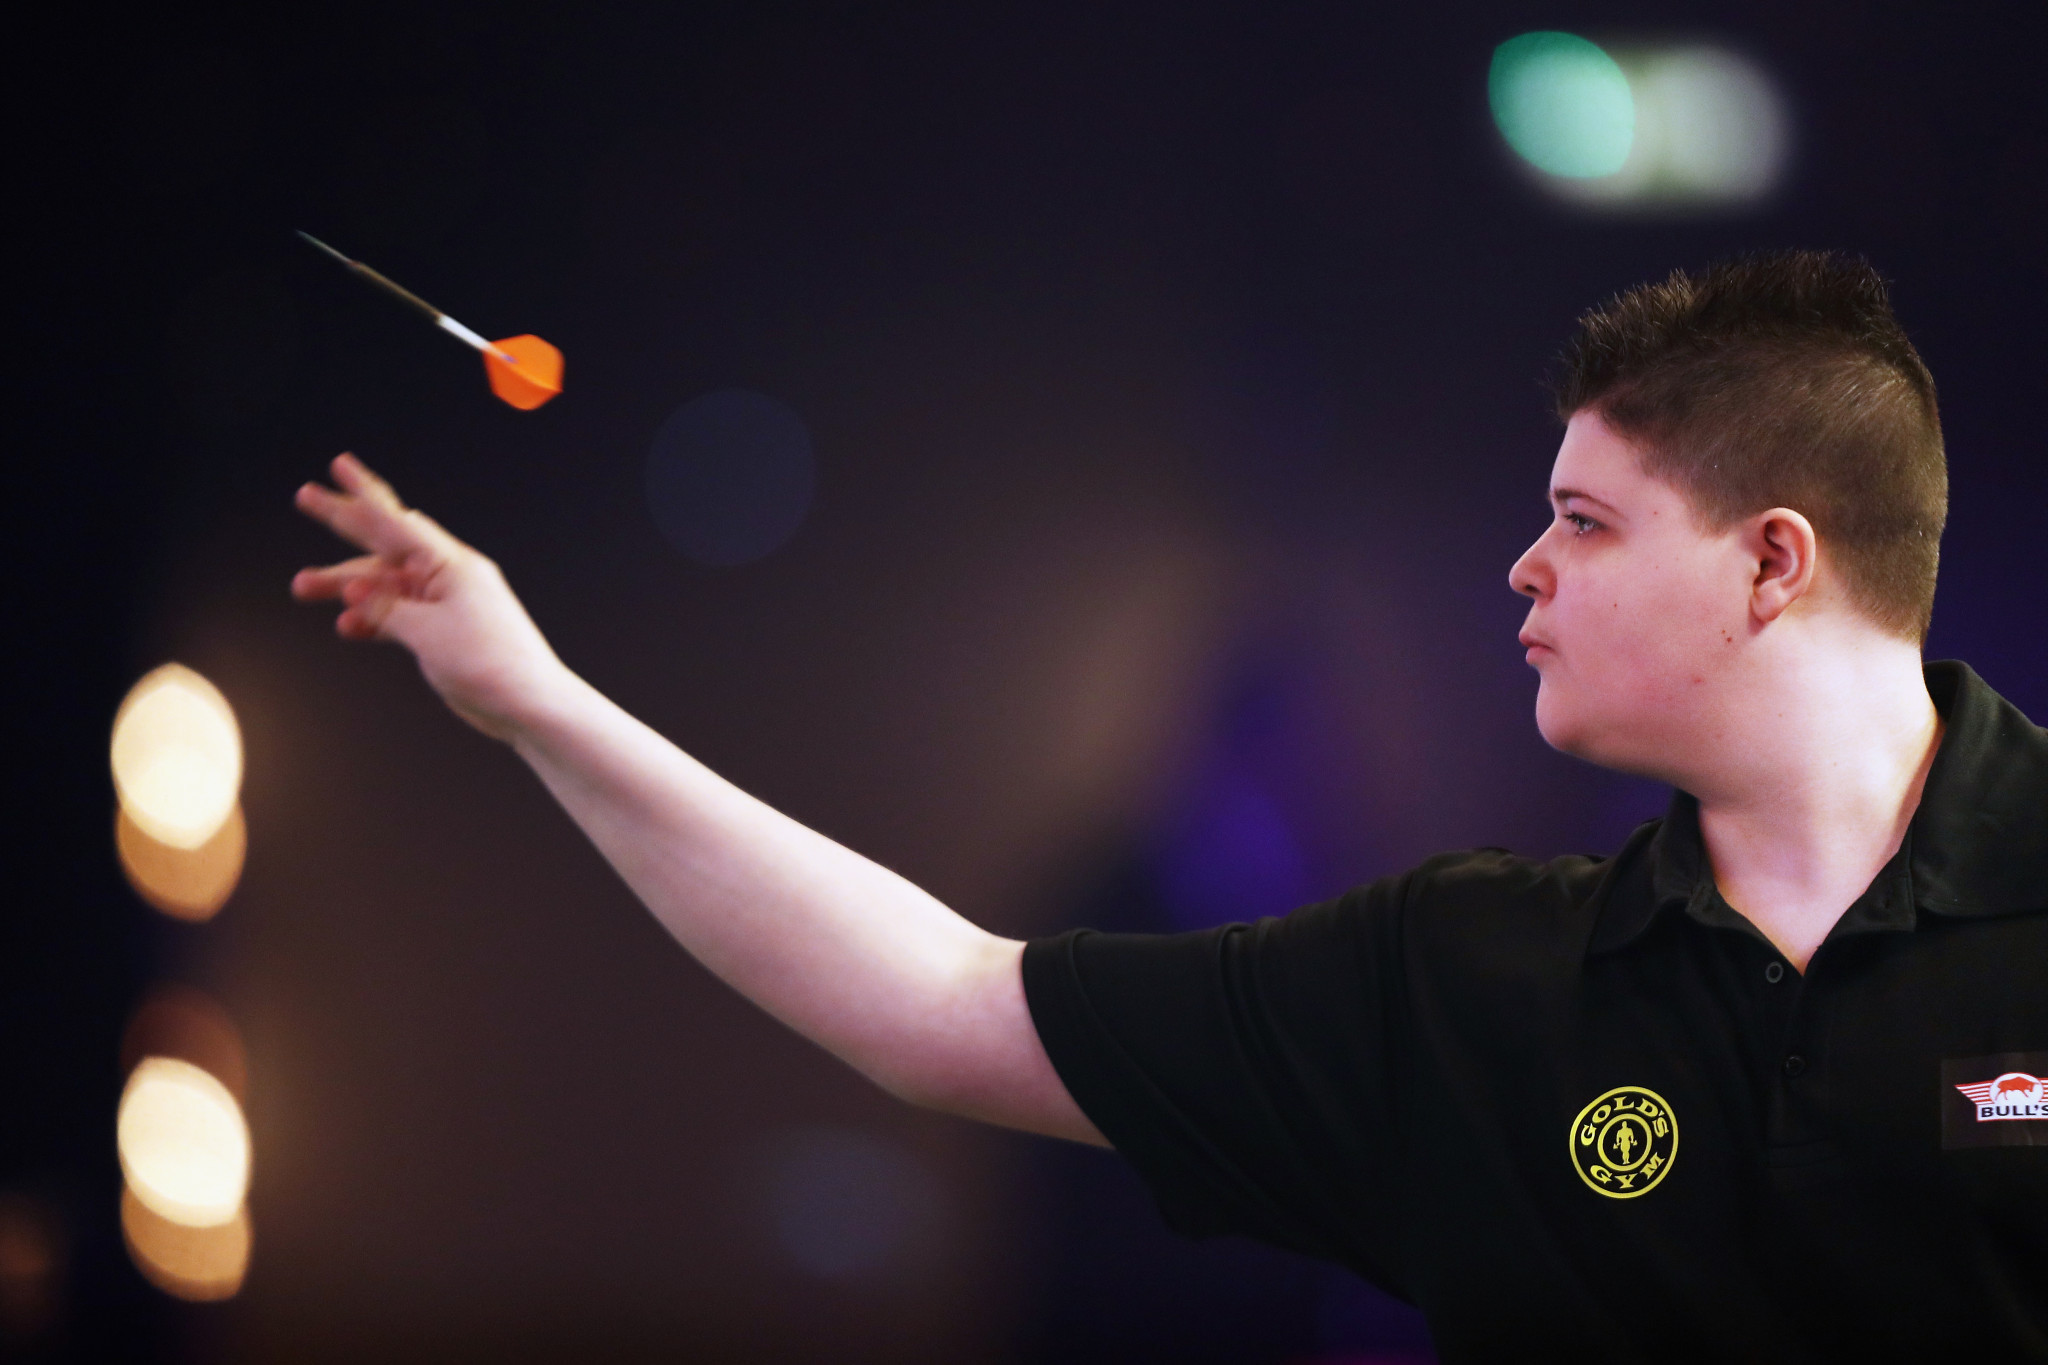 Van Tergouw and Nijman to contest all-Dutch boys' youth final at Darts World Cup